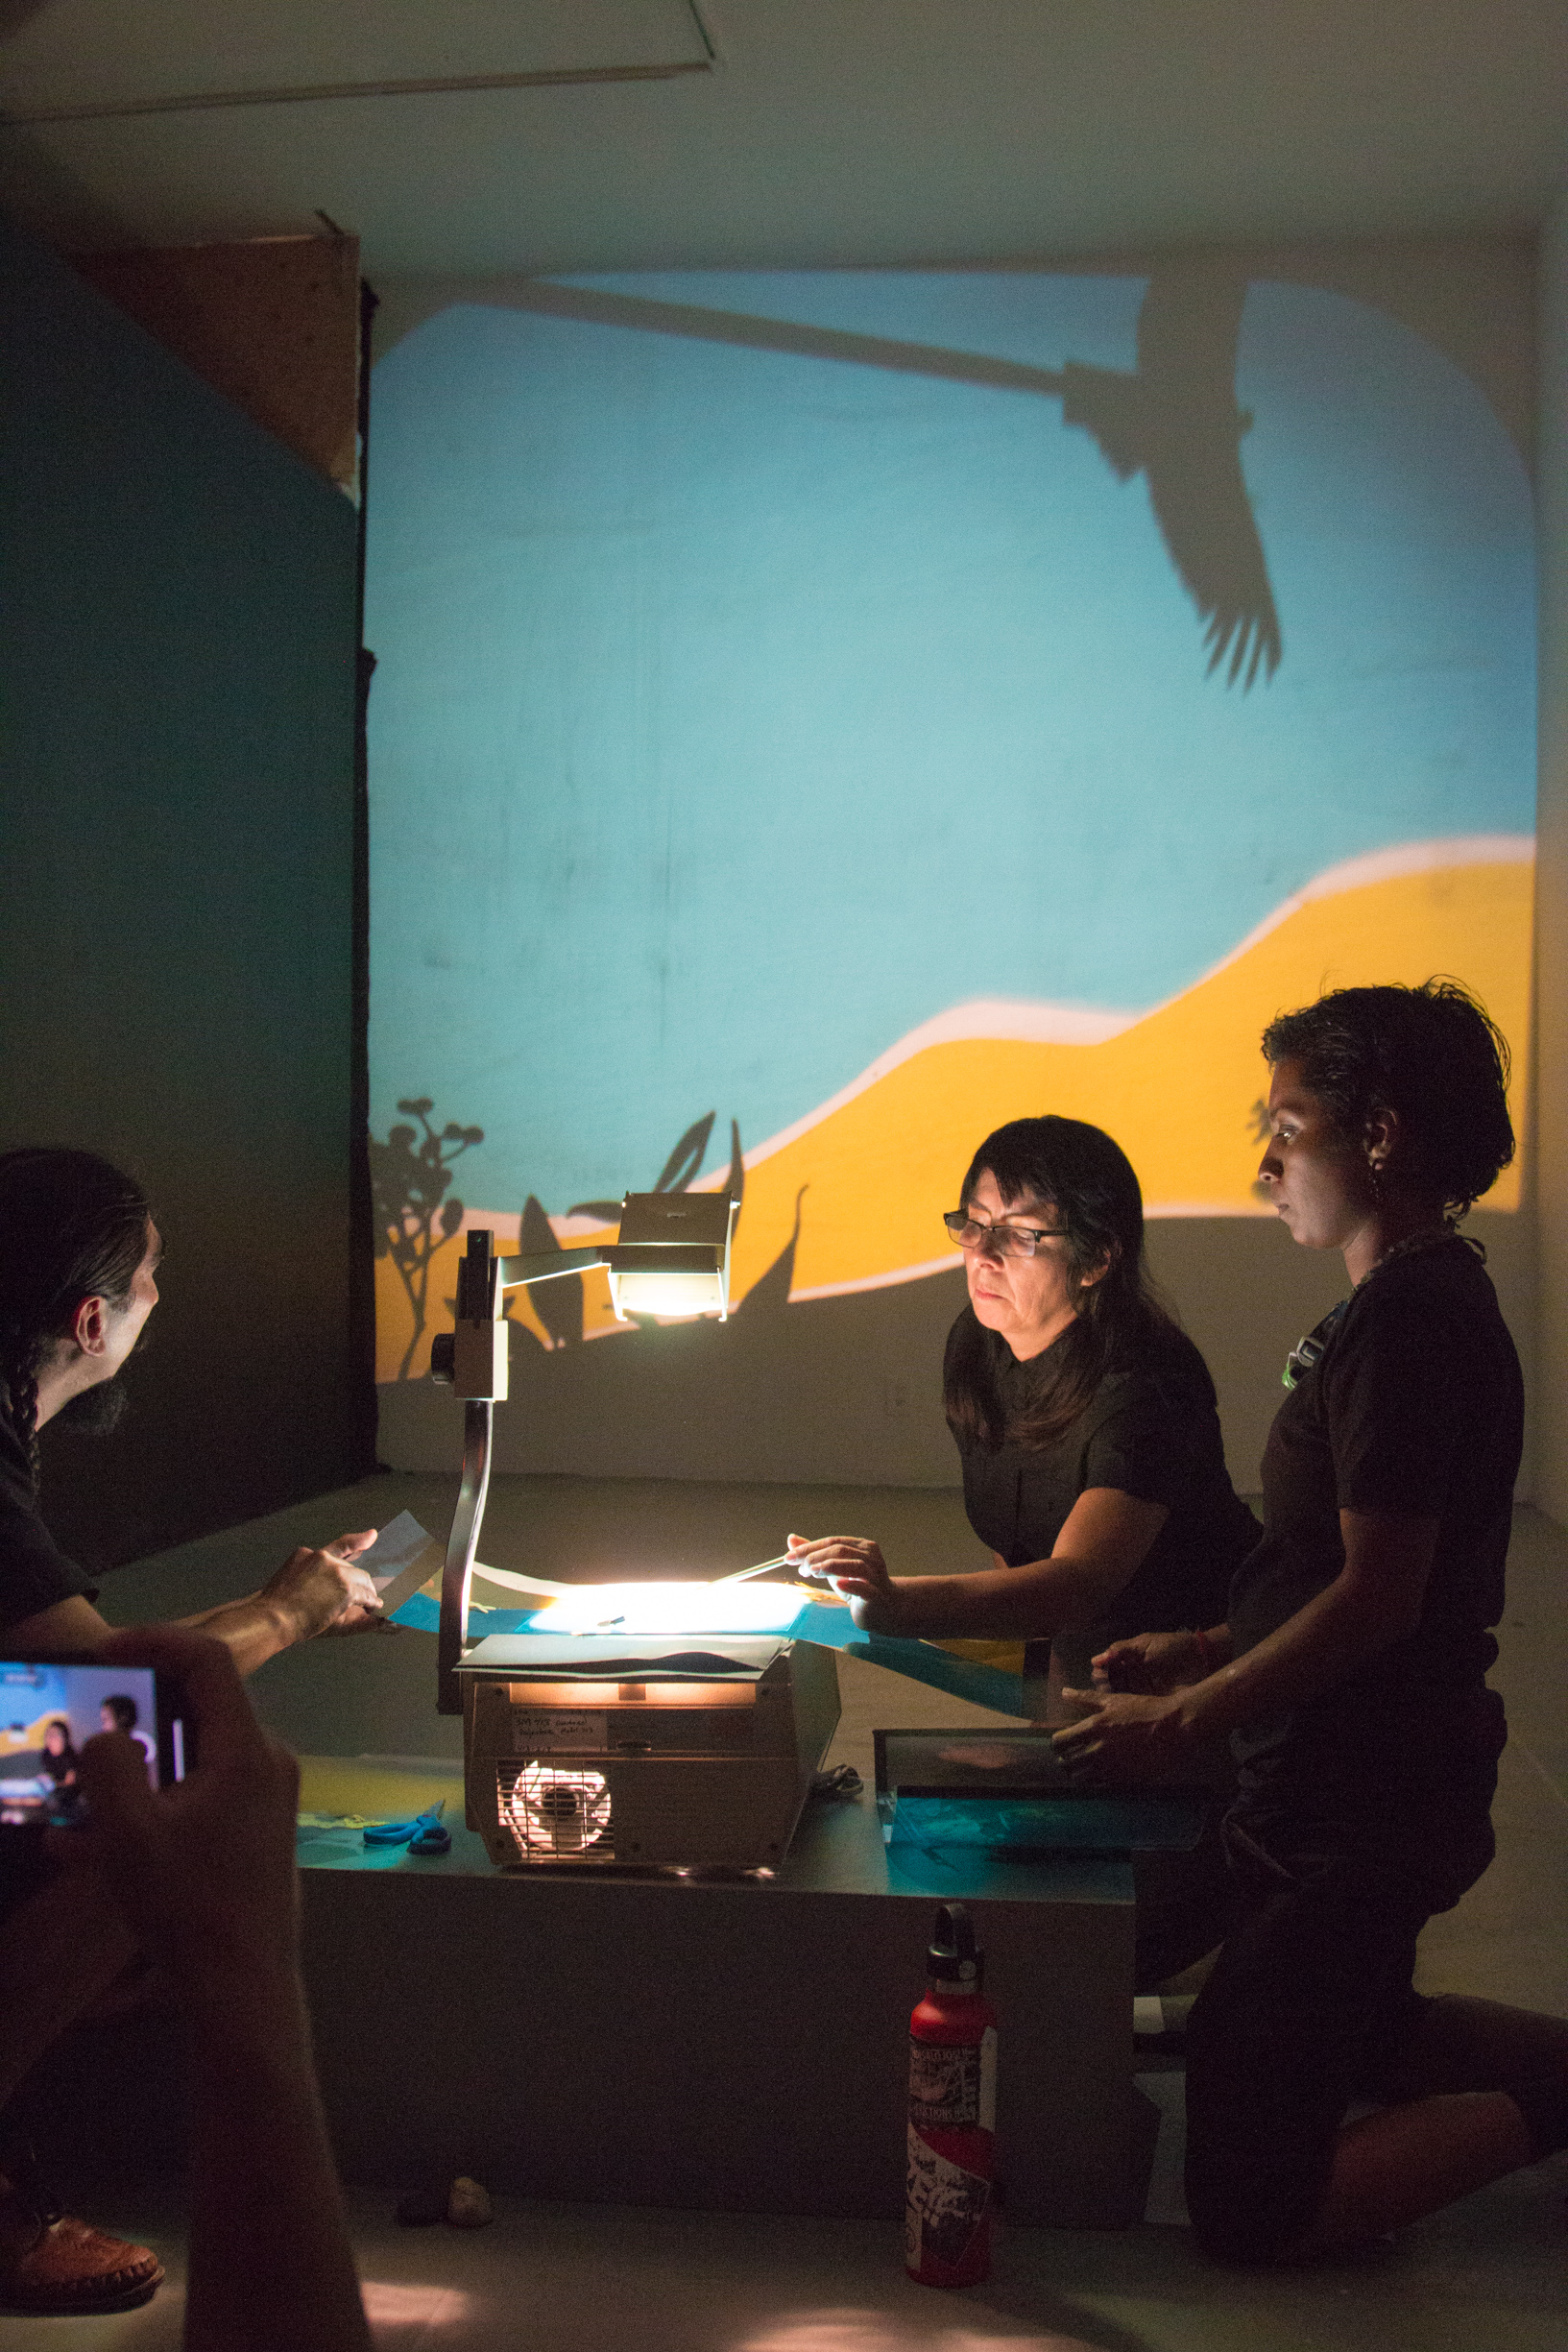 three people gather around an old-school projector. A colorful collage with yellow, blues and shadow puppets is projected onto the wall behind them.